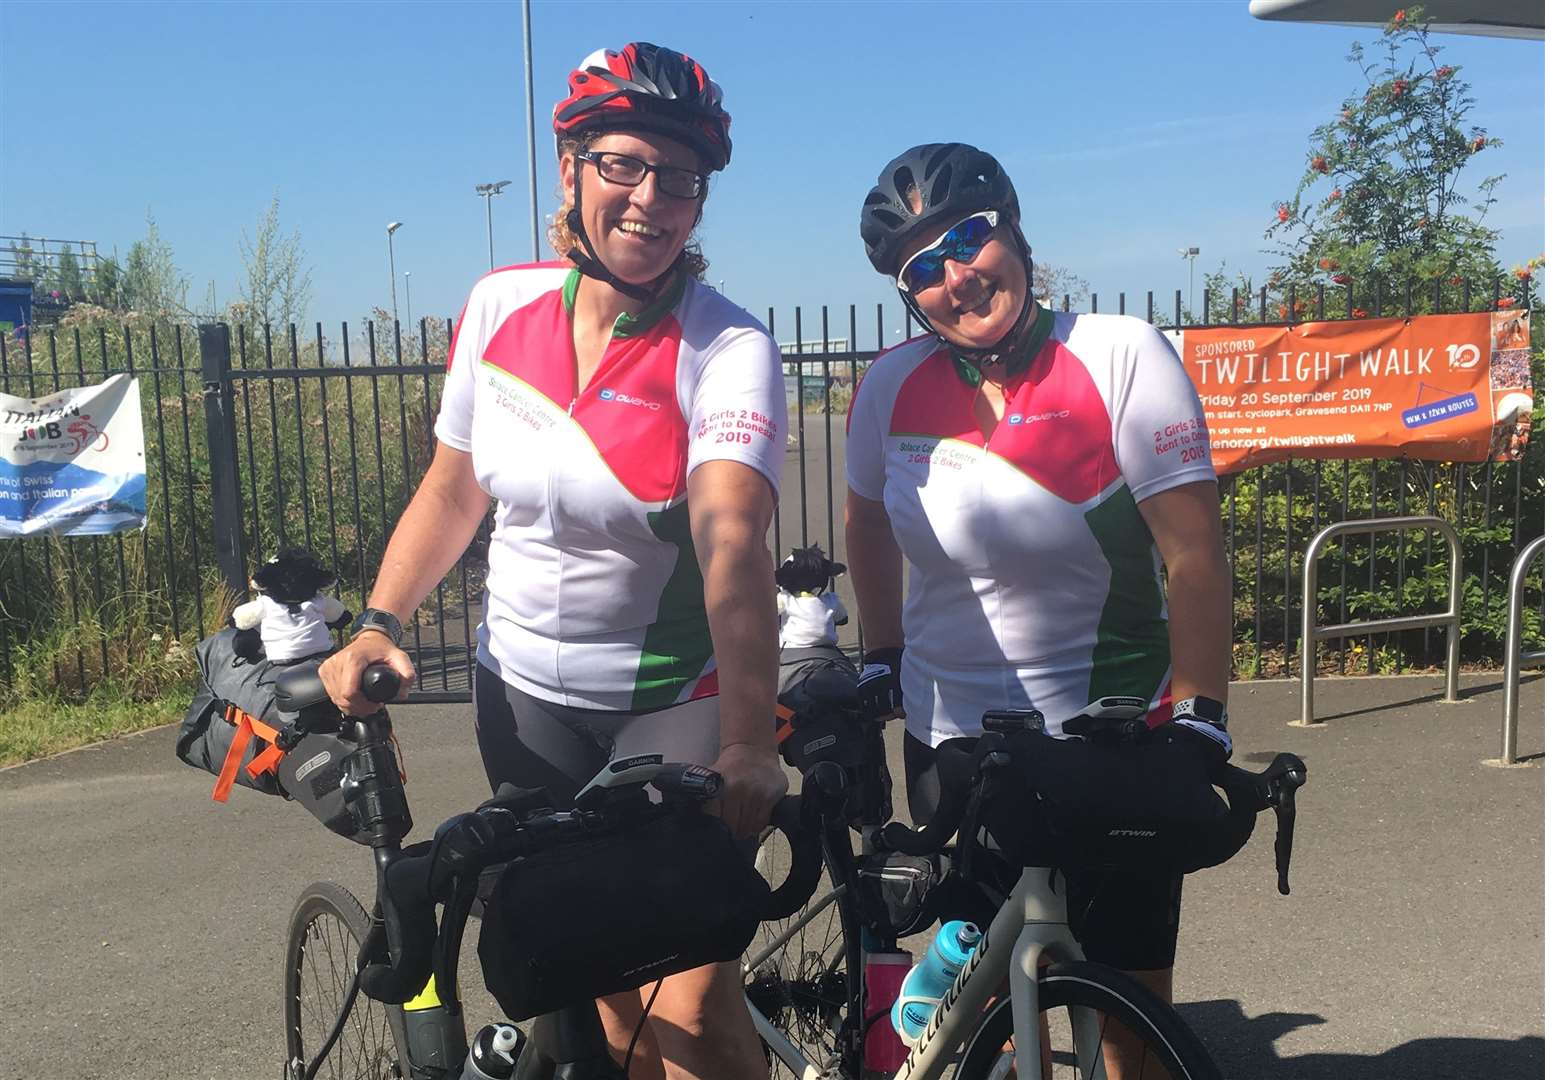 Lorraine McCormack (left) and Rachel Knott setting off on their 2,000km bike ride from Gravesend to Donegal (14277668)